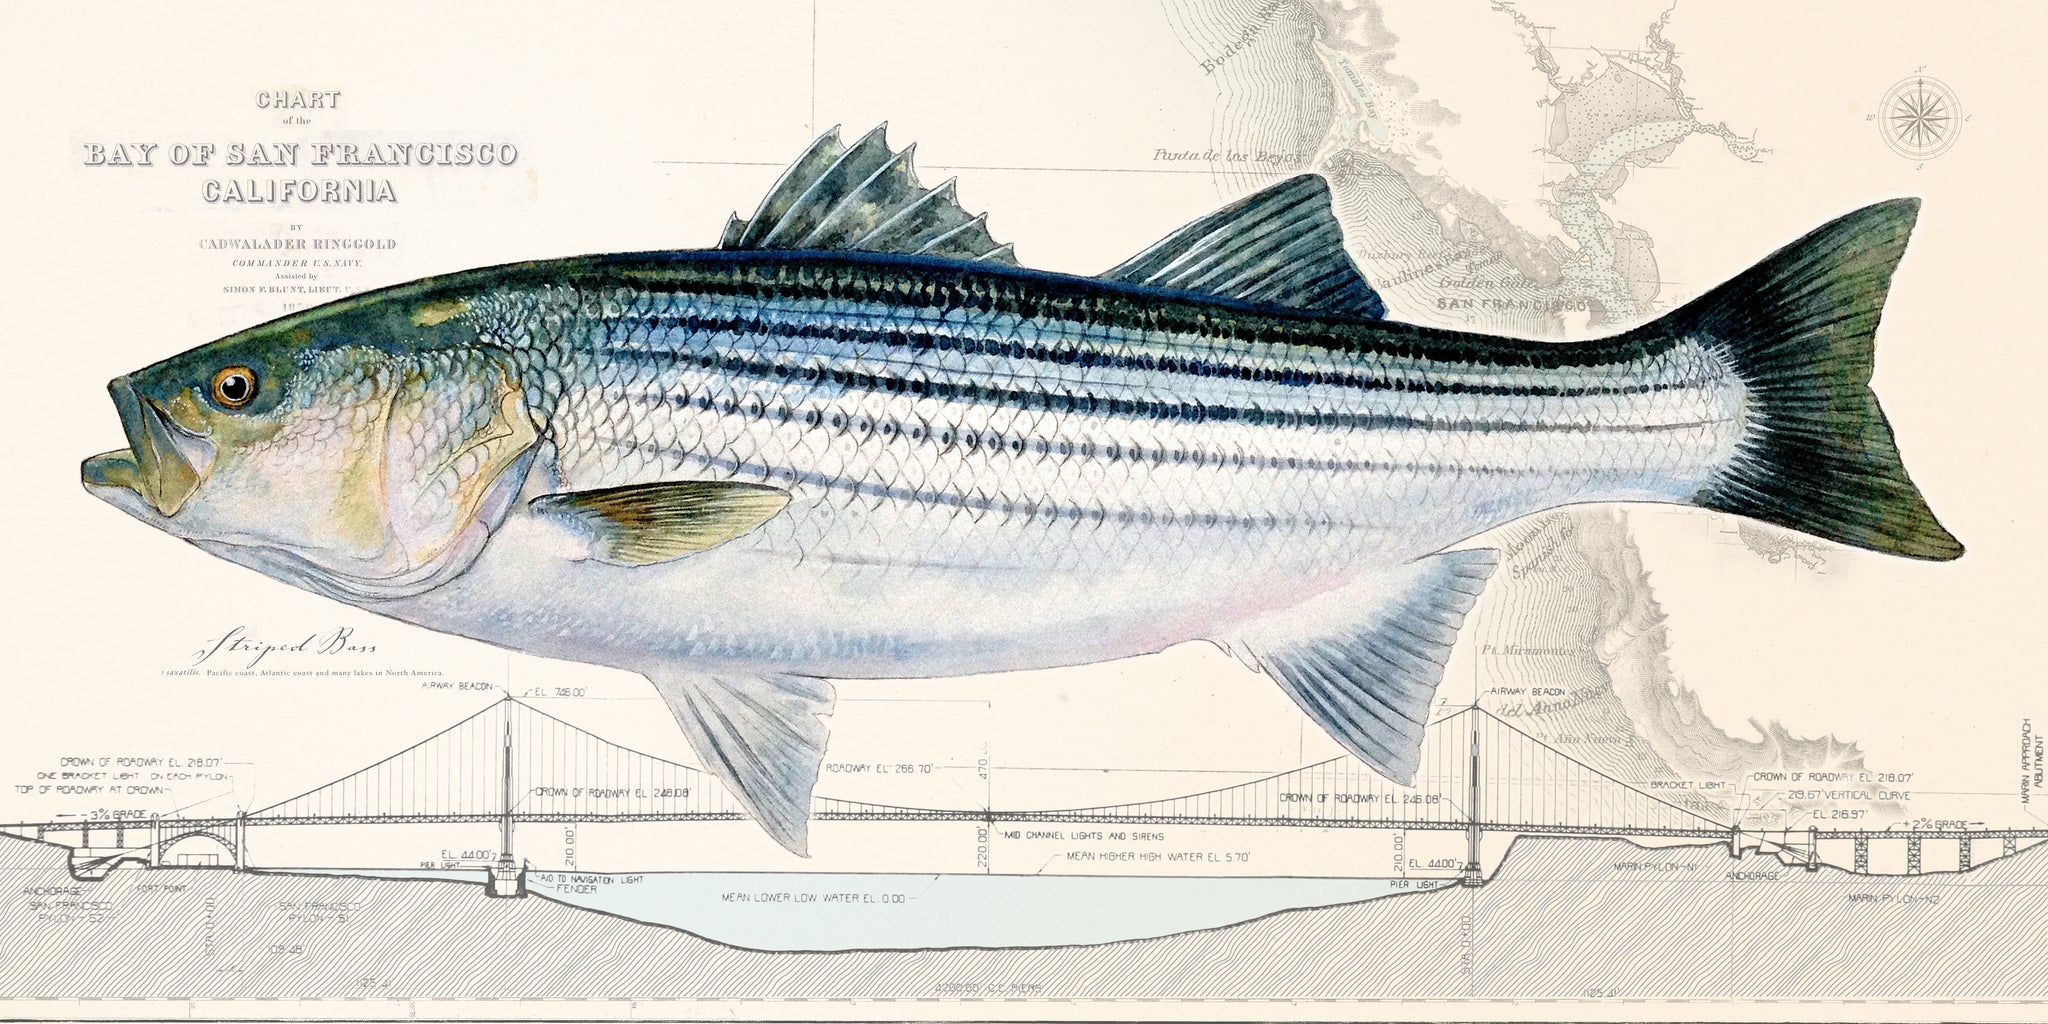 Striped Bass over Nautical Charts